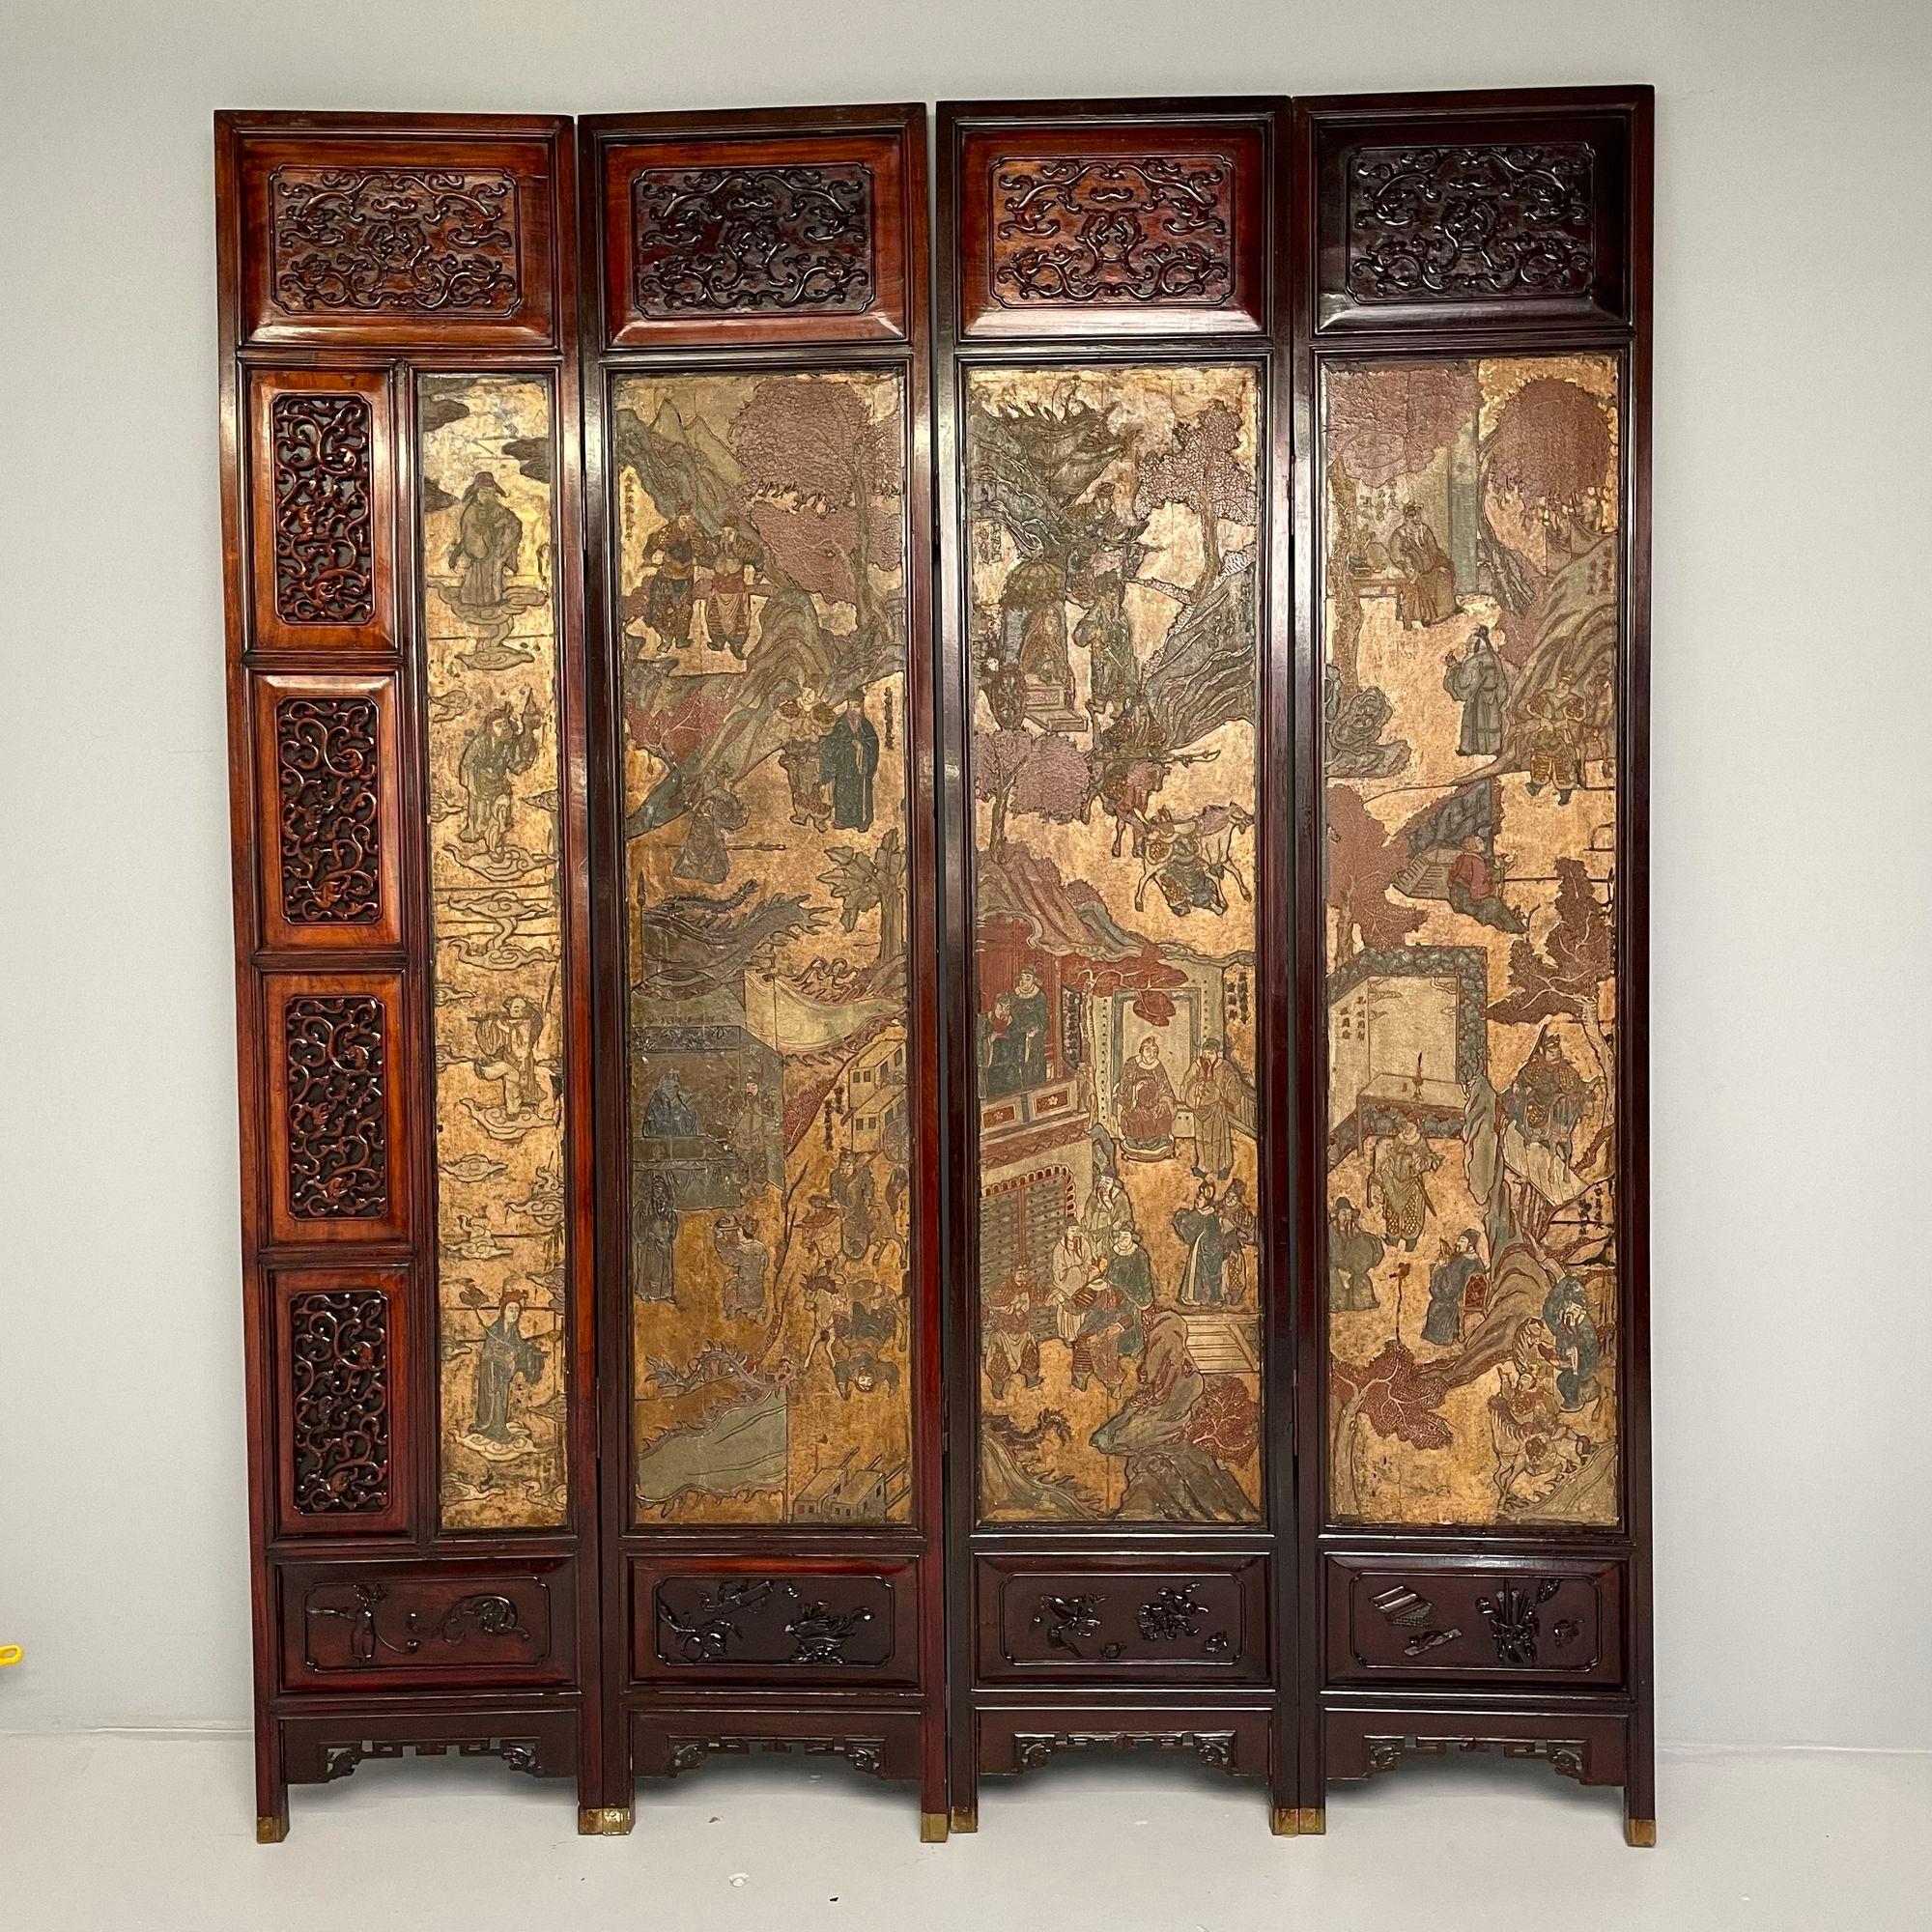 Chinoiserie Unusual Eight Panel Chinese Coromandel Screen circa 1700-1800 with Carved Frame For Sale